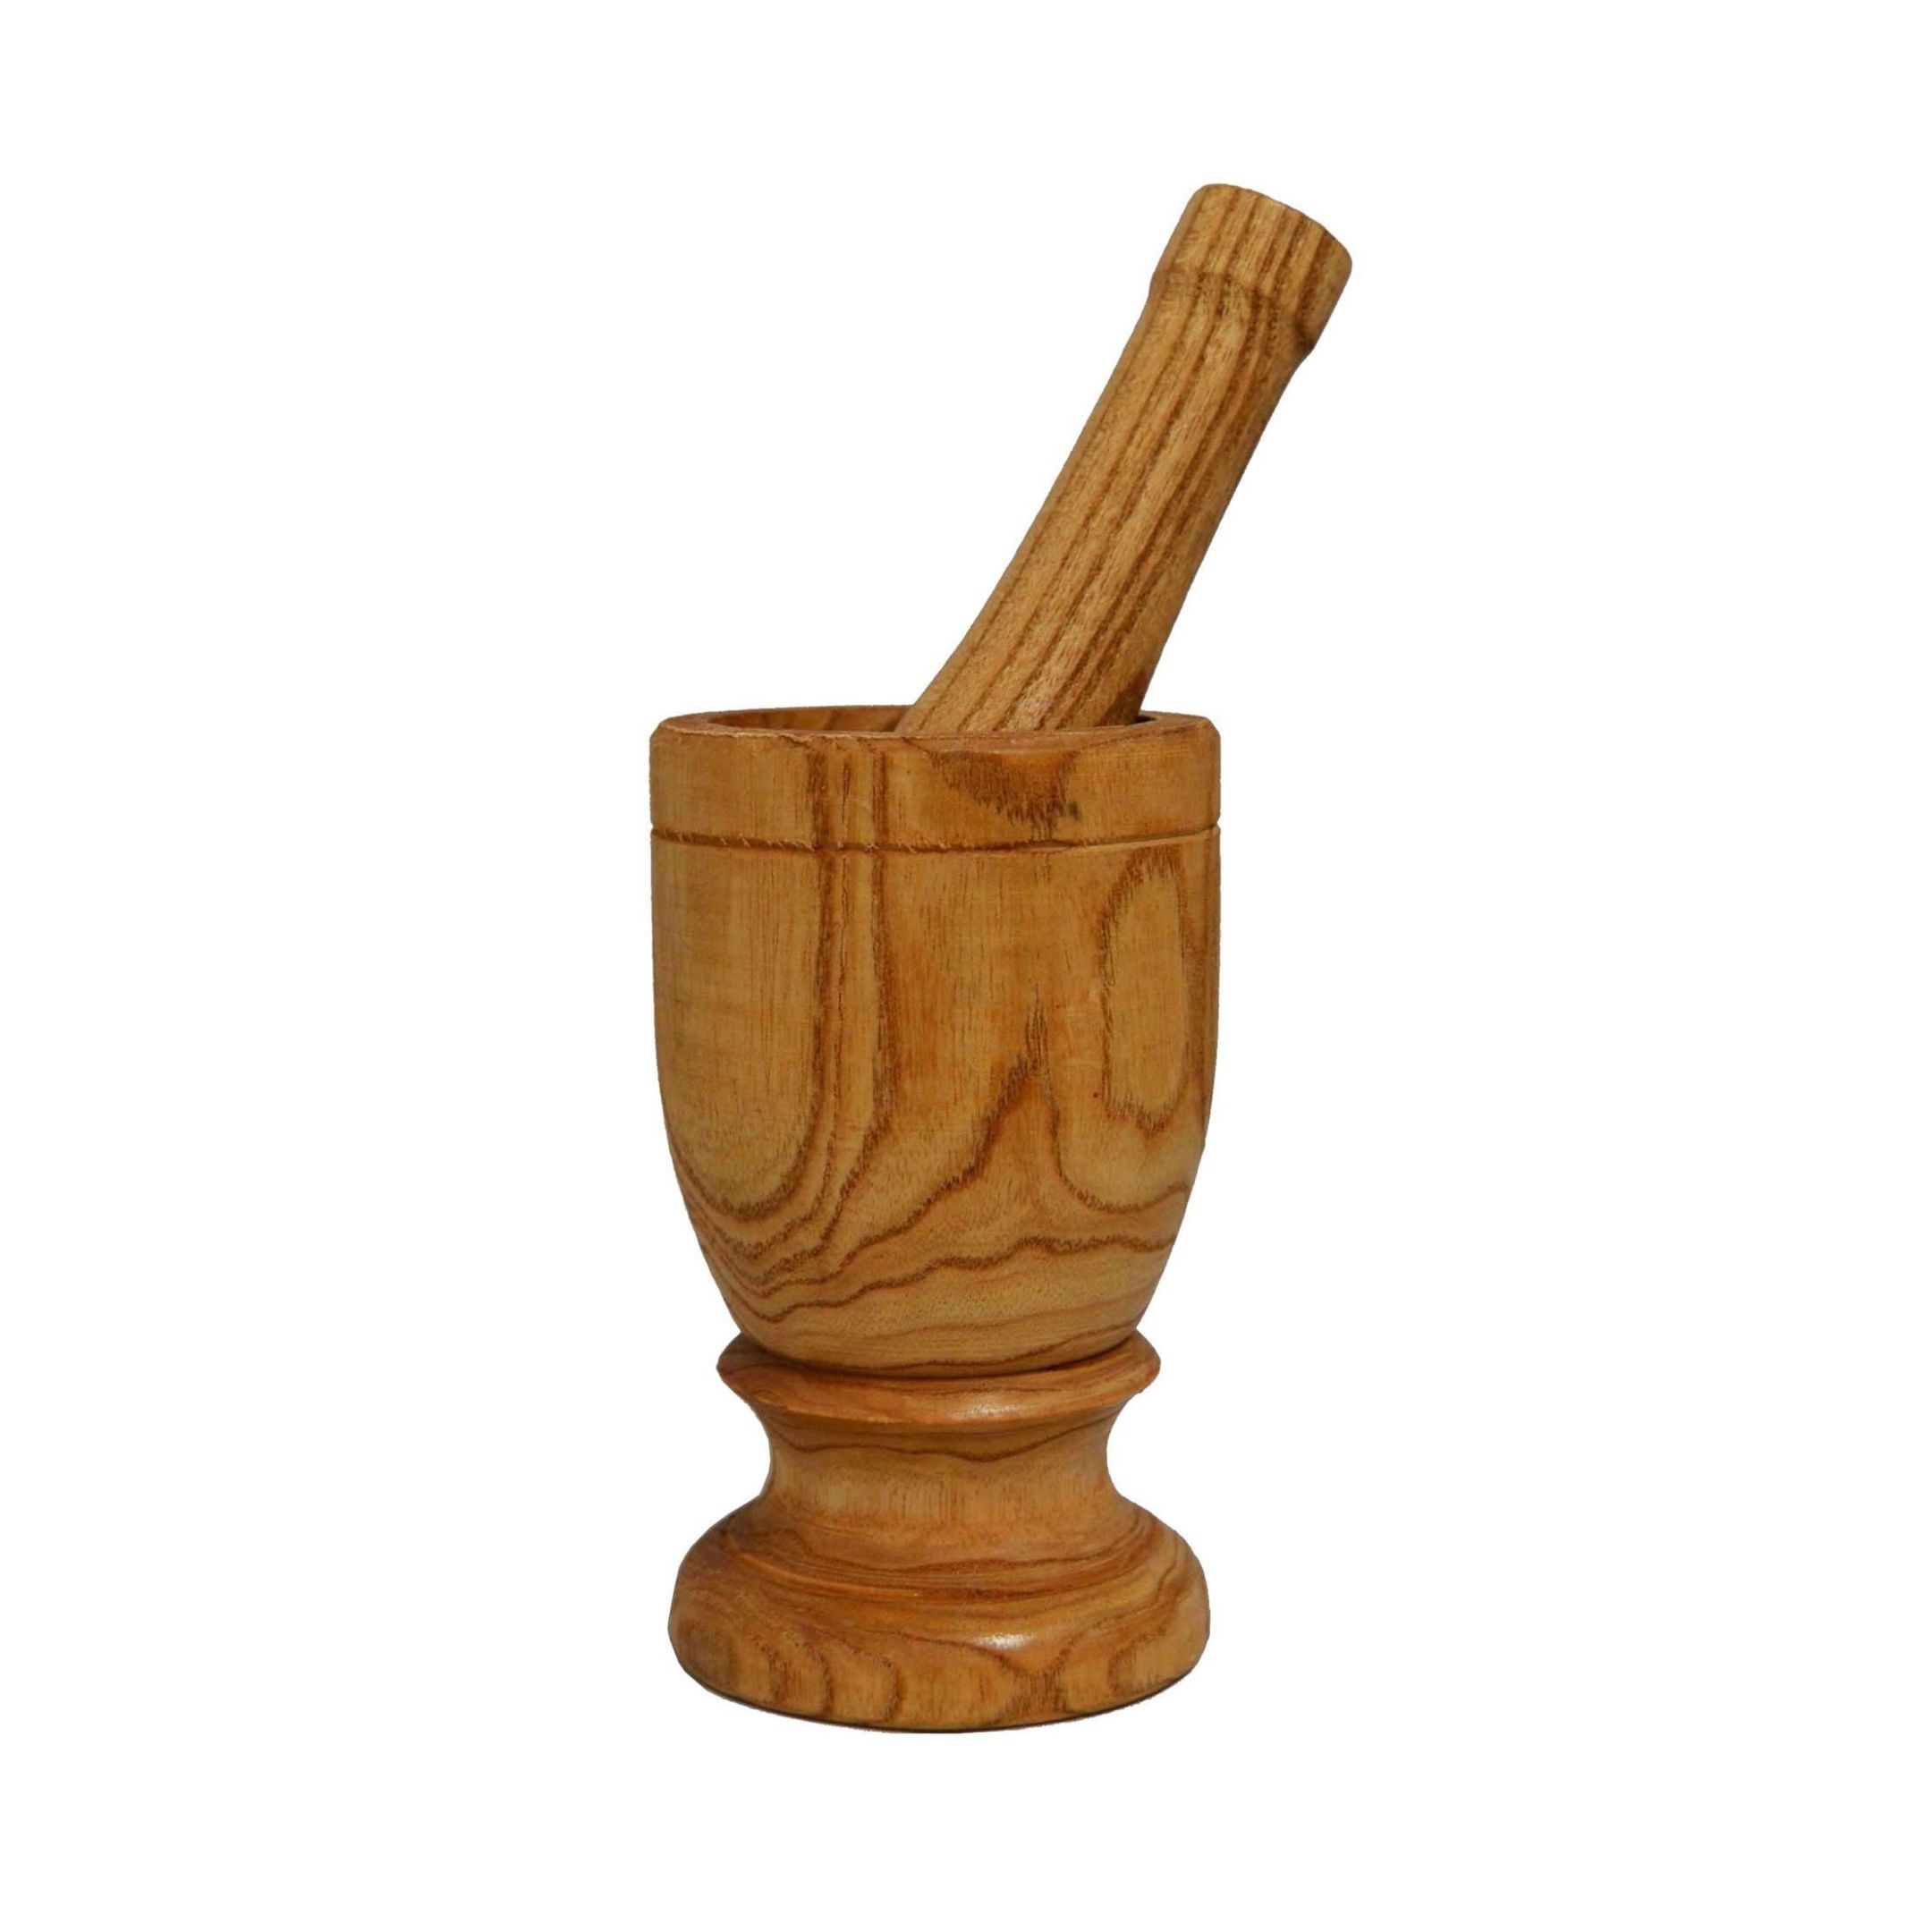 Imusa Small Traditional Wood Mortar and Pestle, Beige - image 1 of 11